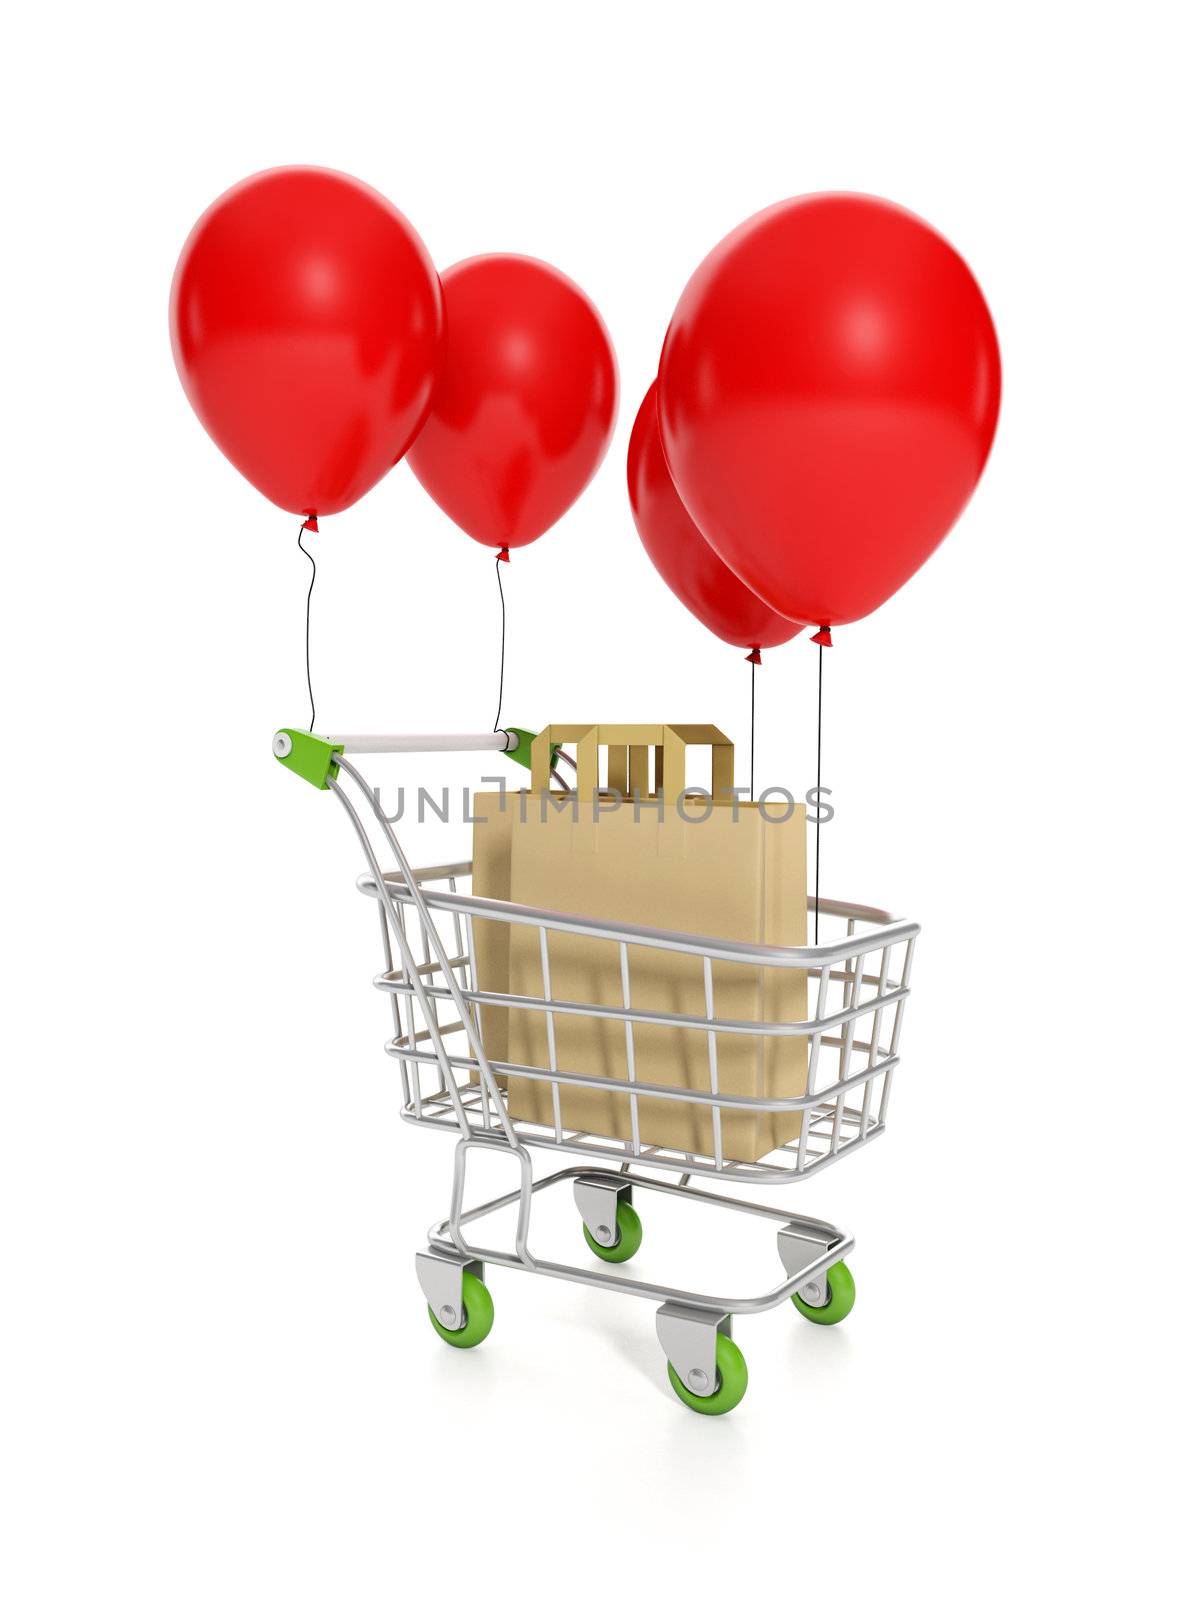 3d illustration: Concept for sale and purchase. Trolley balloon and paper bags, holiday sale. low Price